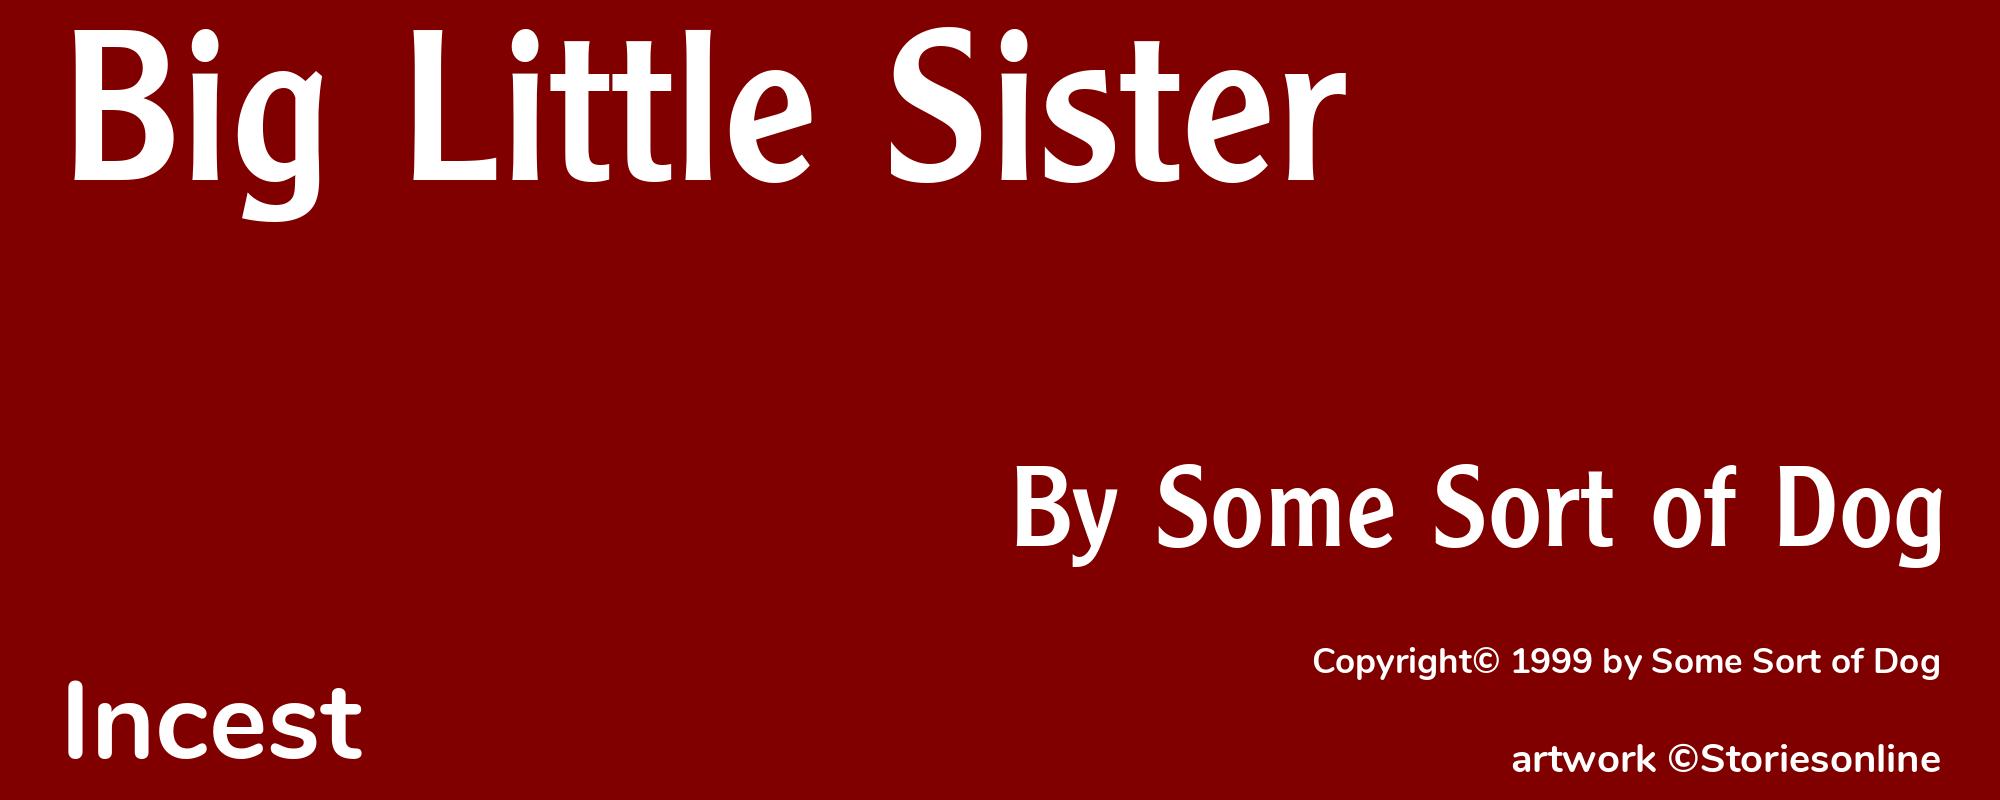 Big Little Sister - Cover